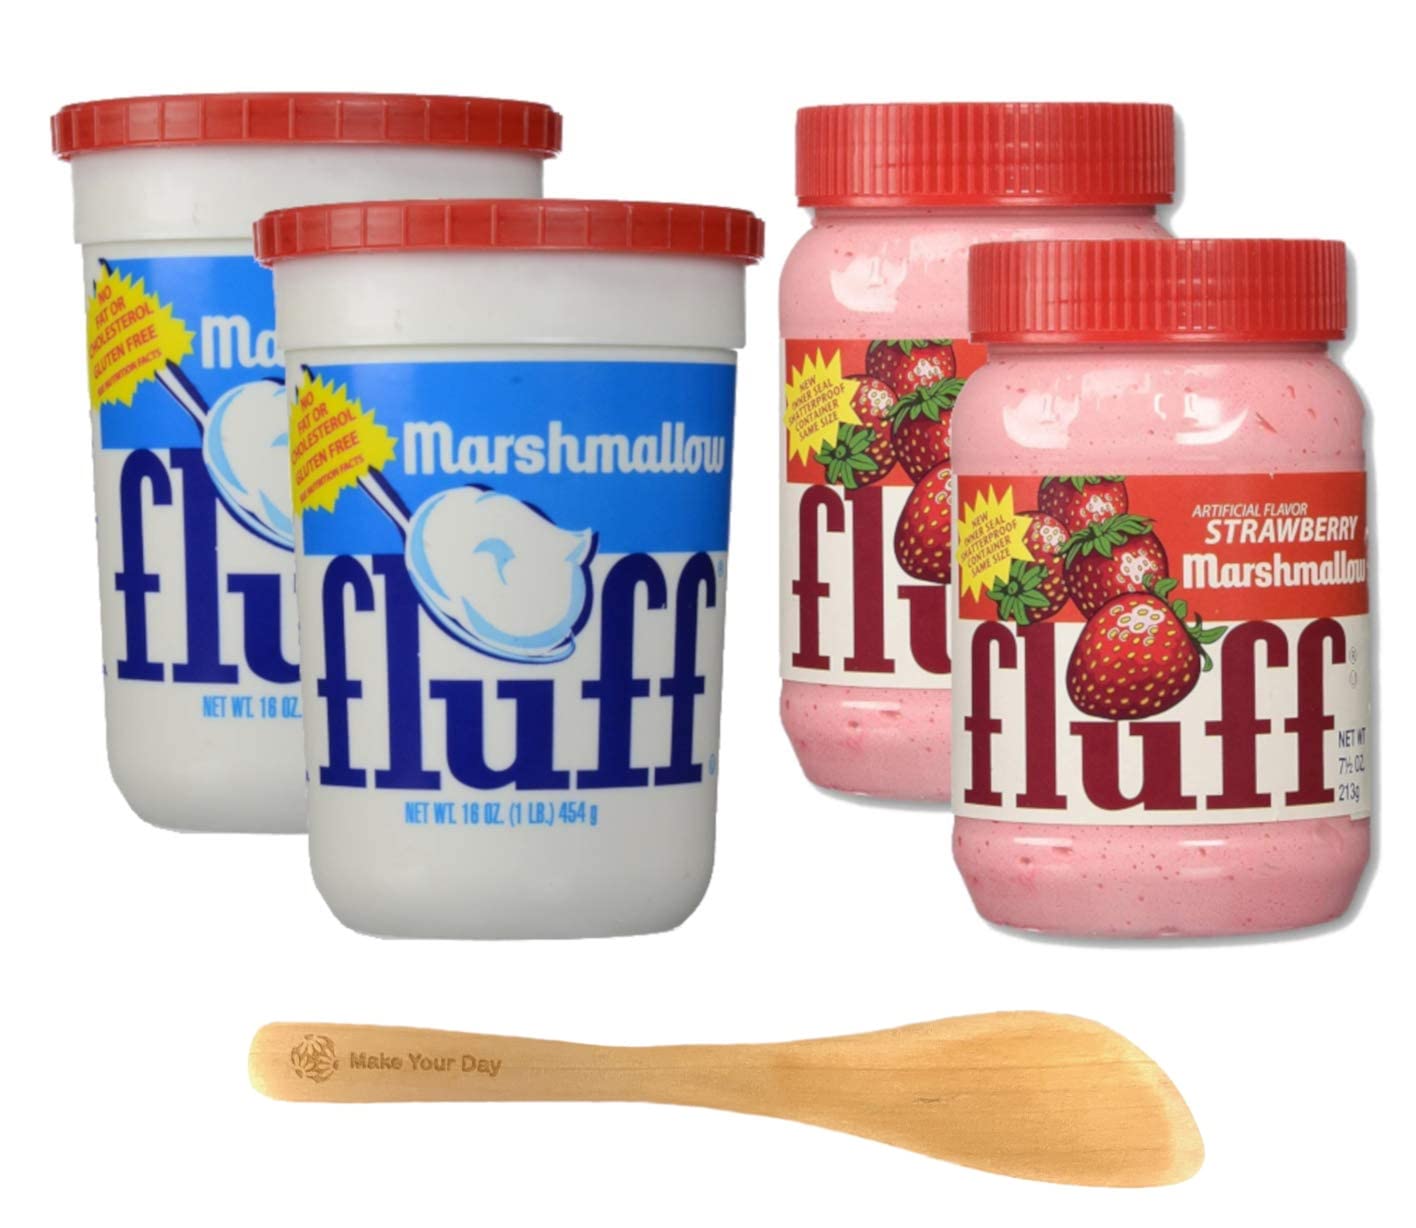 Marshmallow Fluff | Traditional Marshmallow Spread and Cr譥 | Gluten Free,  No Fat or Cholesterol (Strawberry, 7.5 Ounce (Pack of 1))